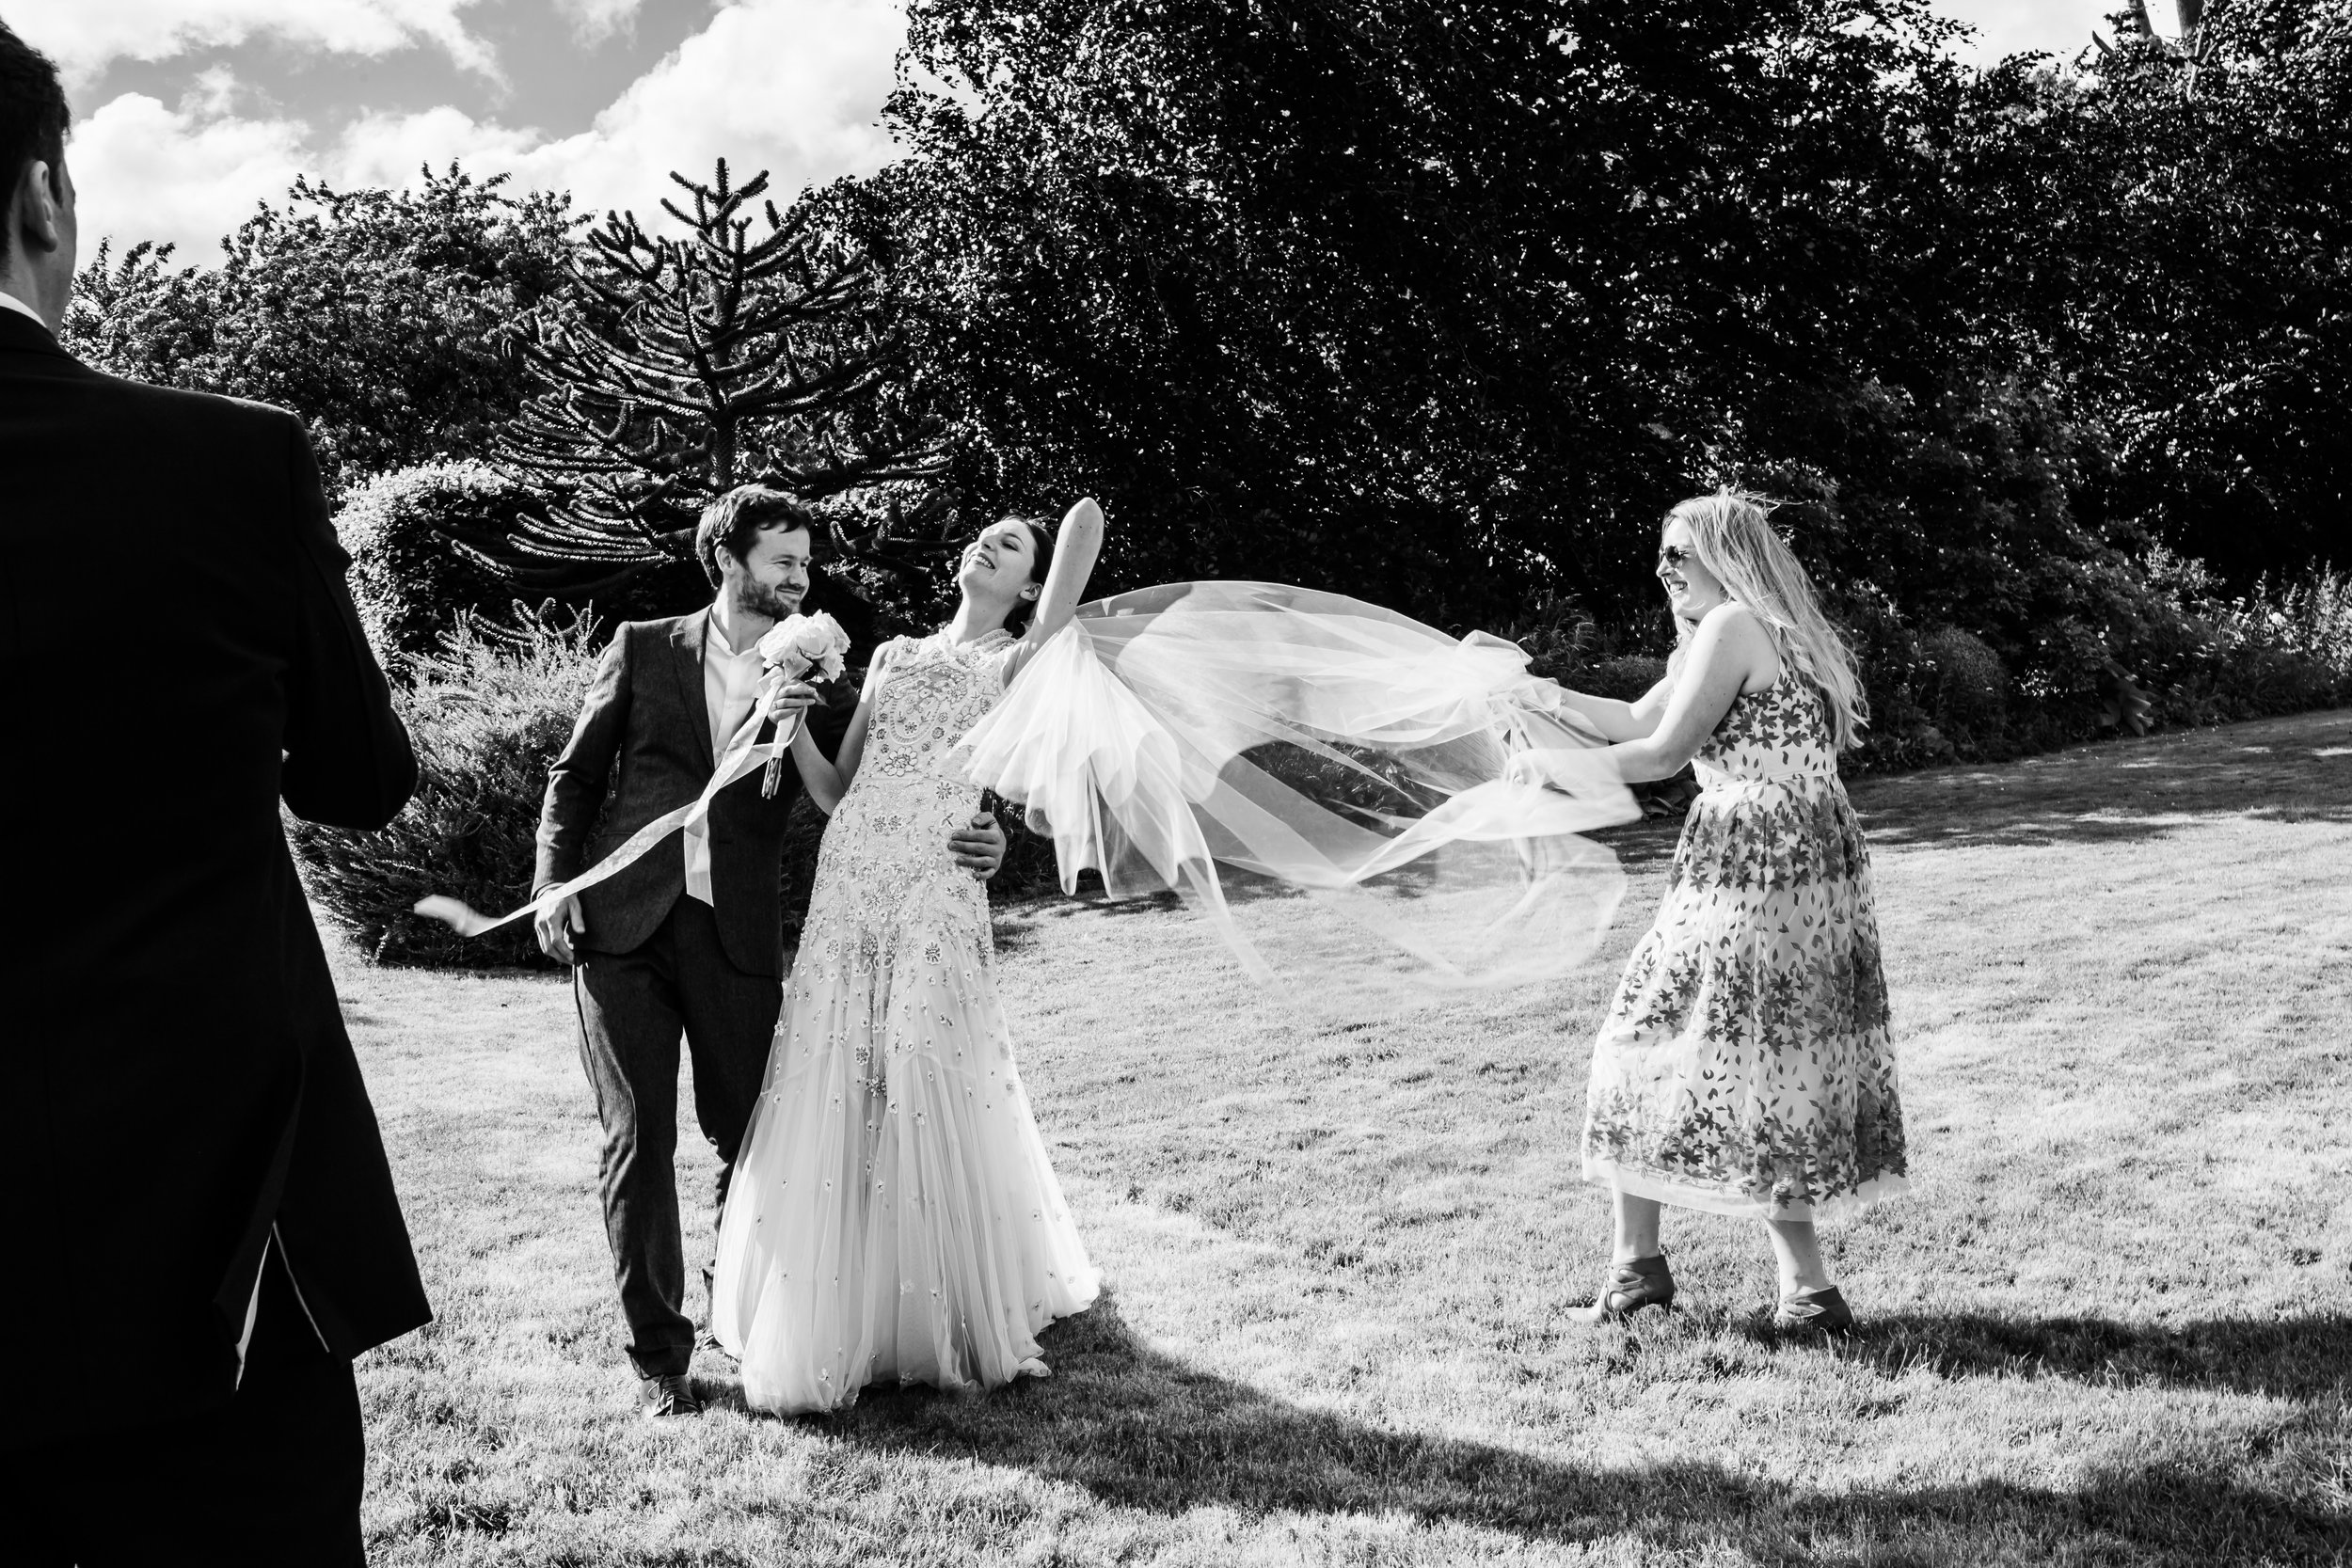 A brides veil blows in the wind